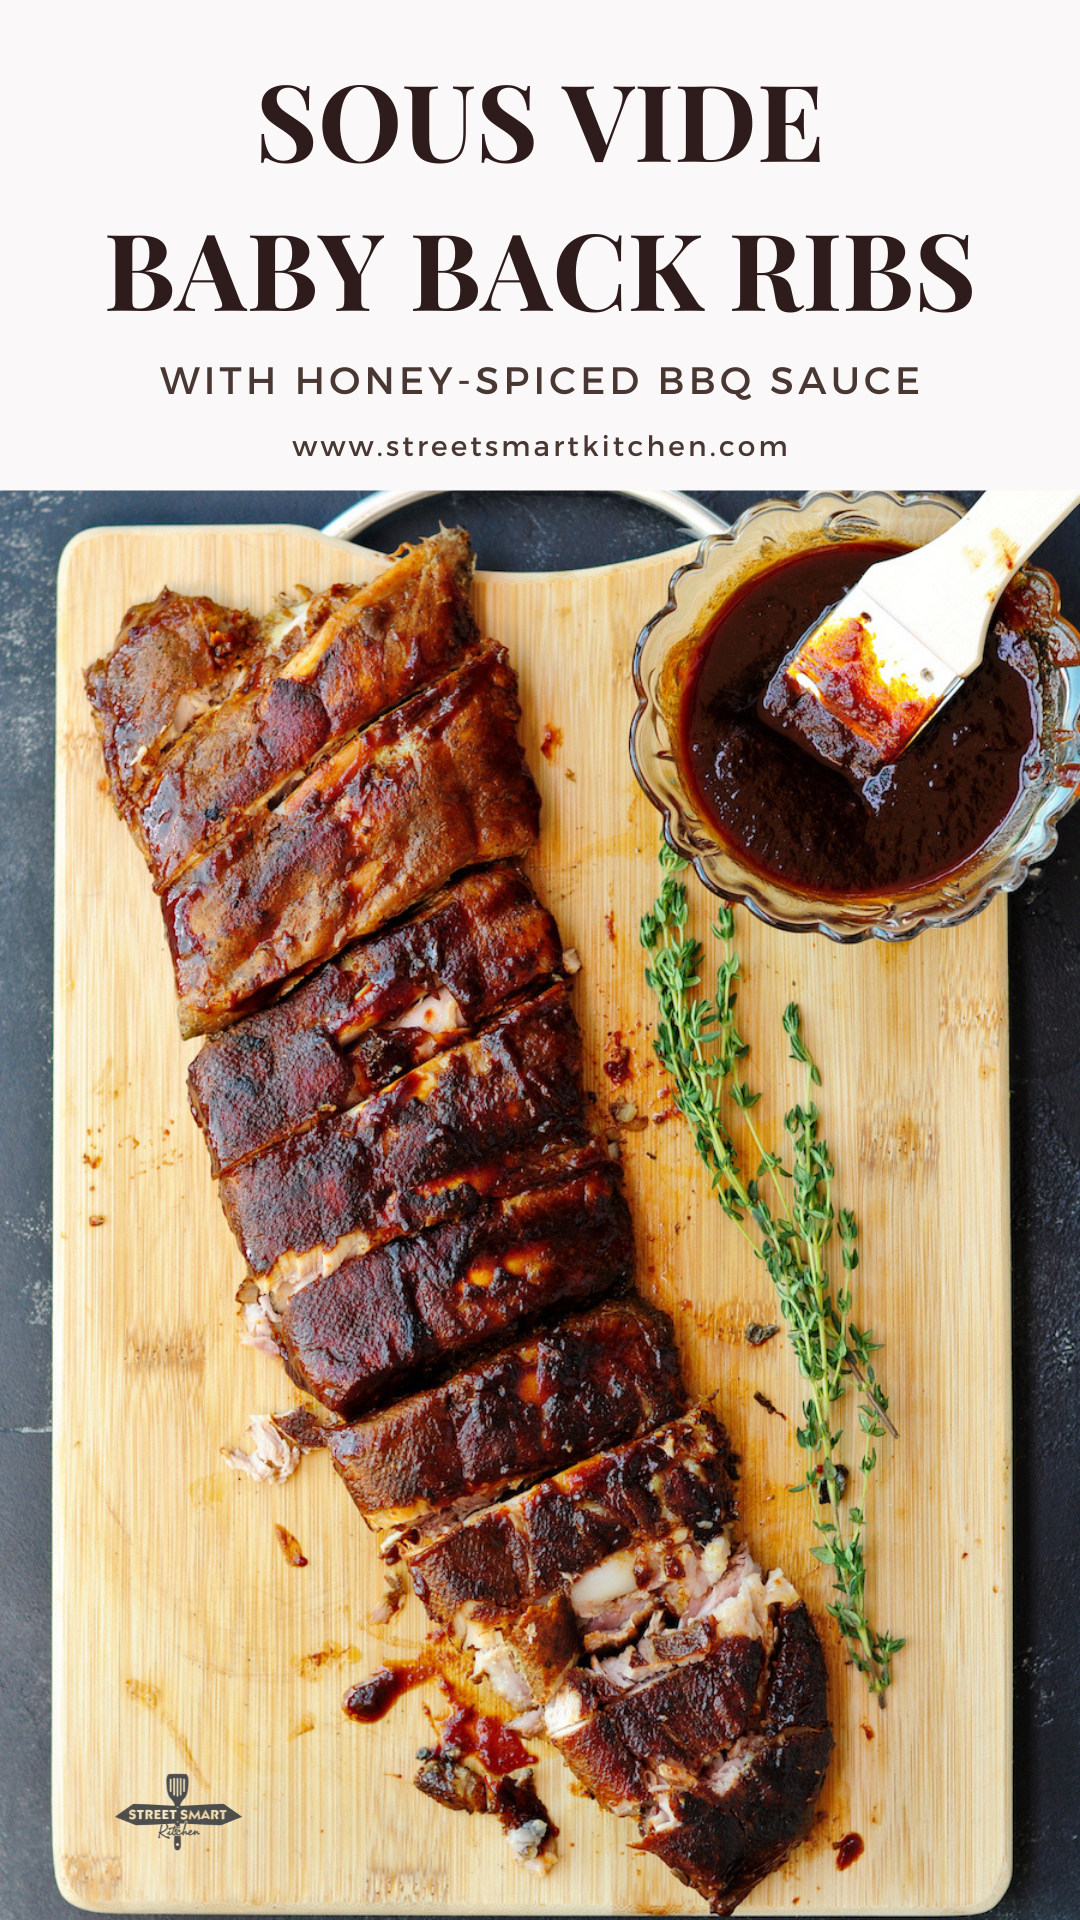 Sous Vide Baby Back Ribs with Honey-Spiced BBQ Sauce - pin 1